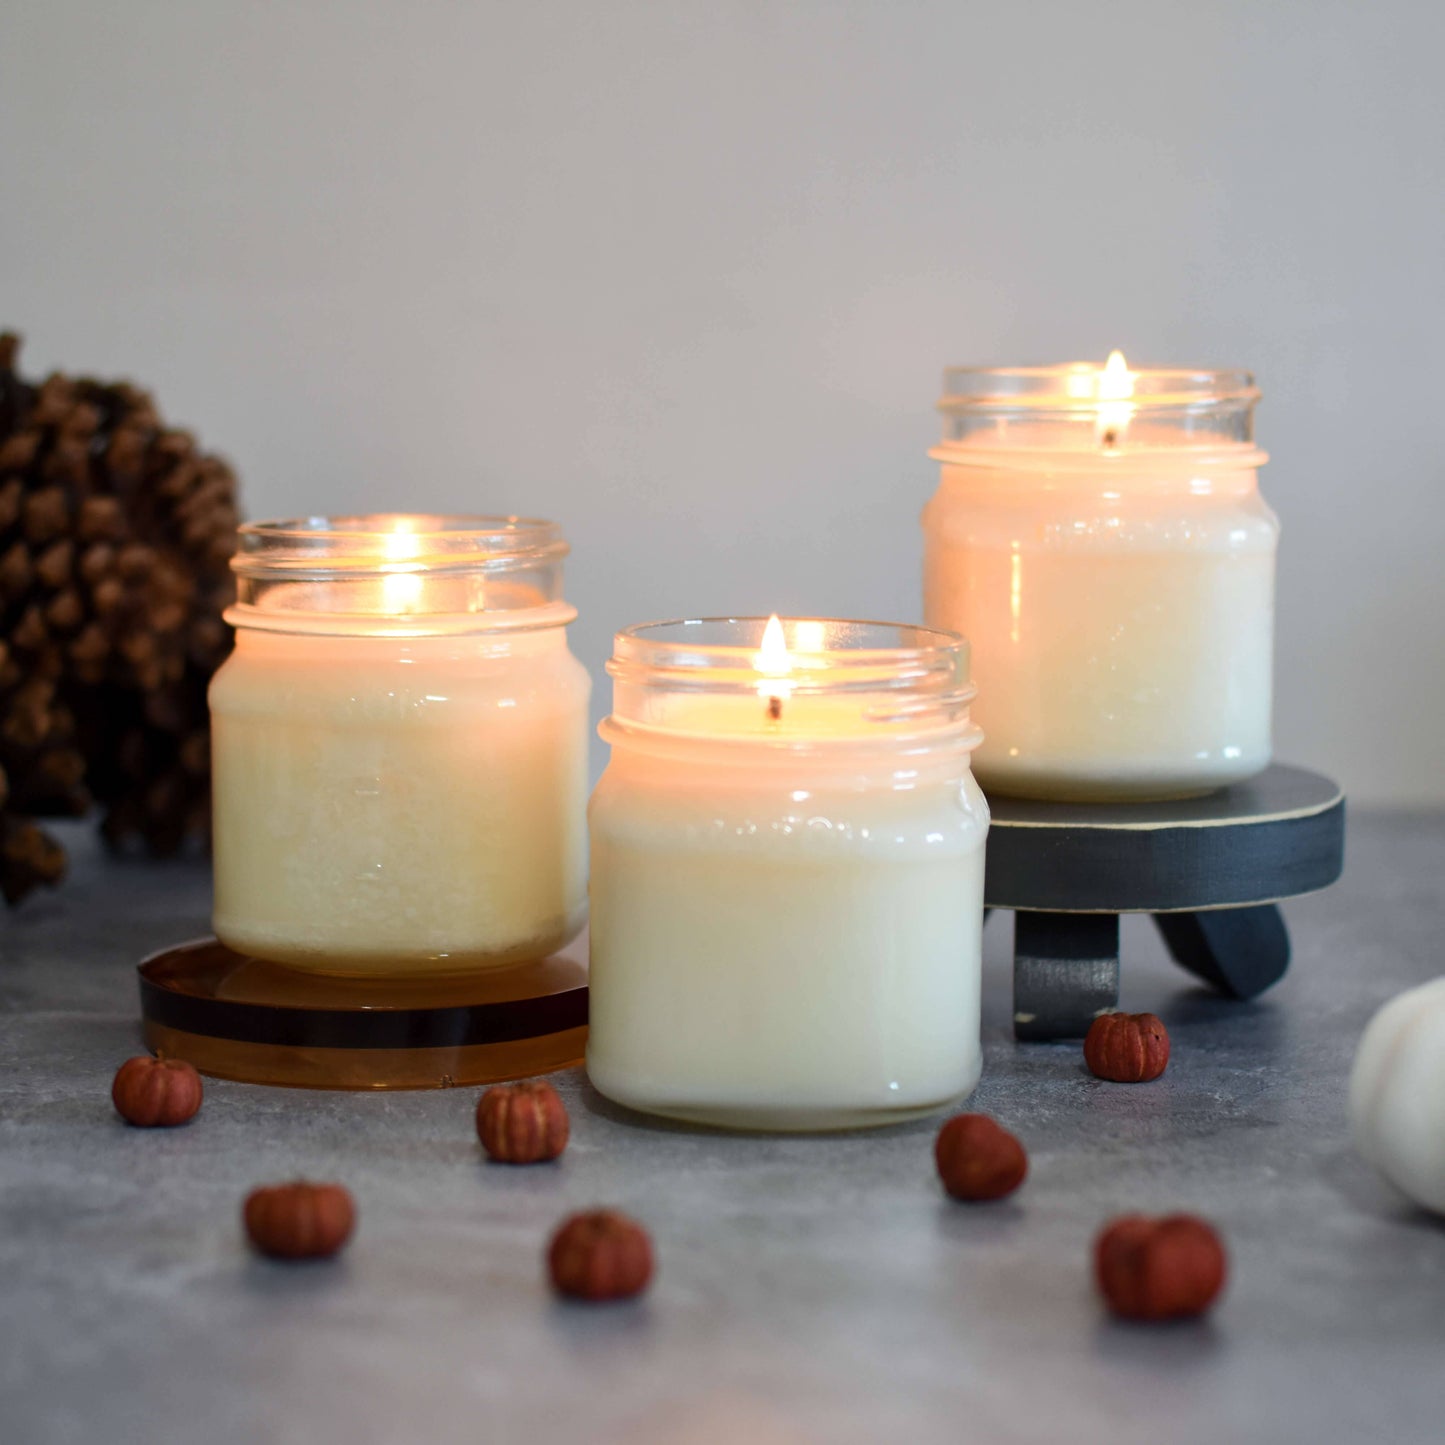 Sweater Weather 8 oz. Soy Candle - Holiday, Winter Decor